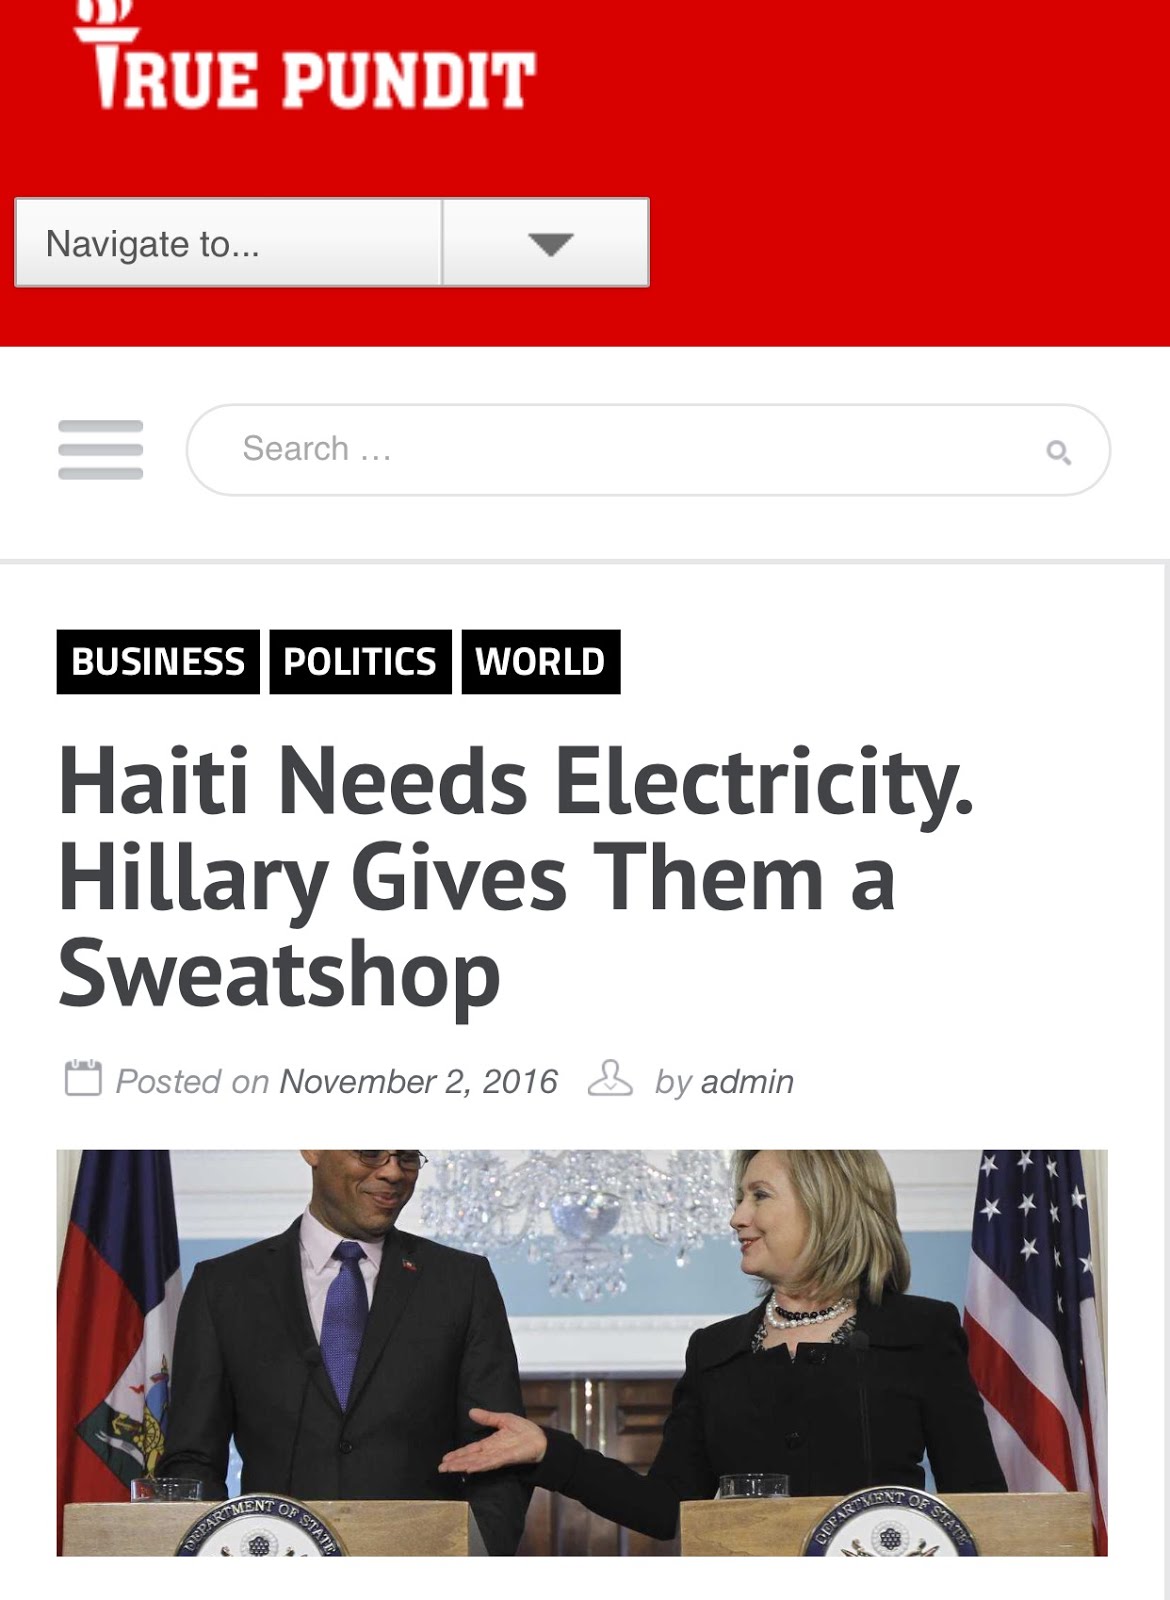 November 2, 2013: Our Haiti Story Featured at True Pundit